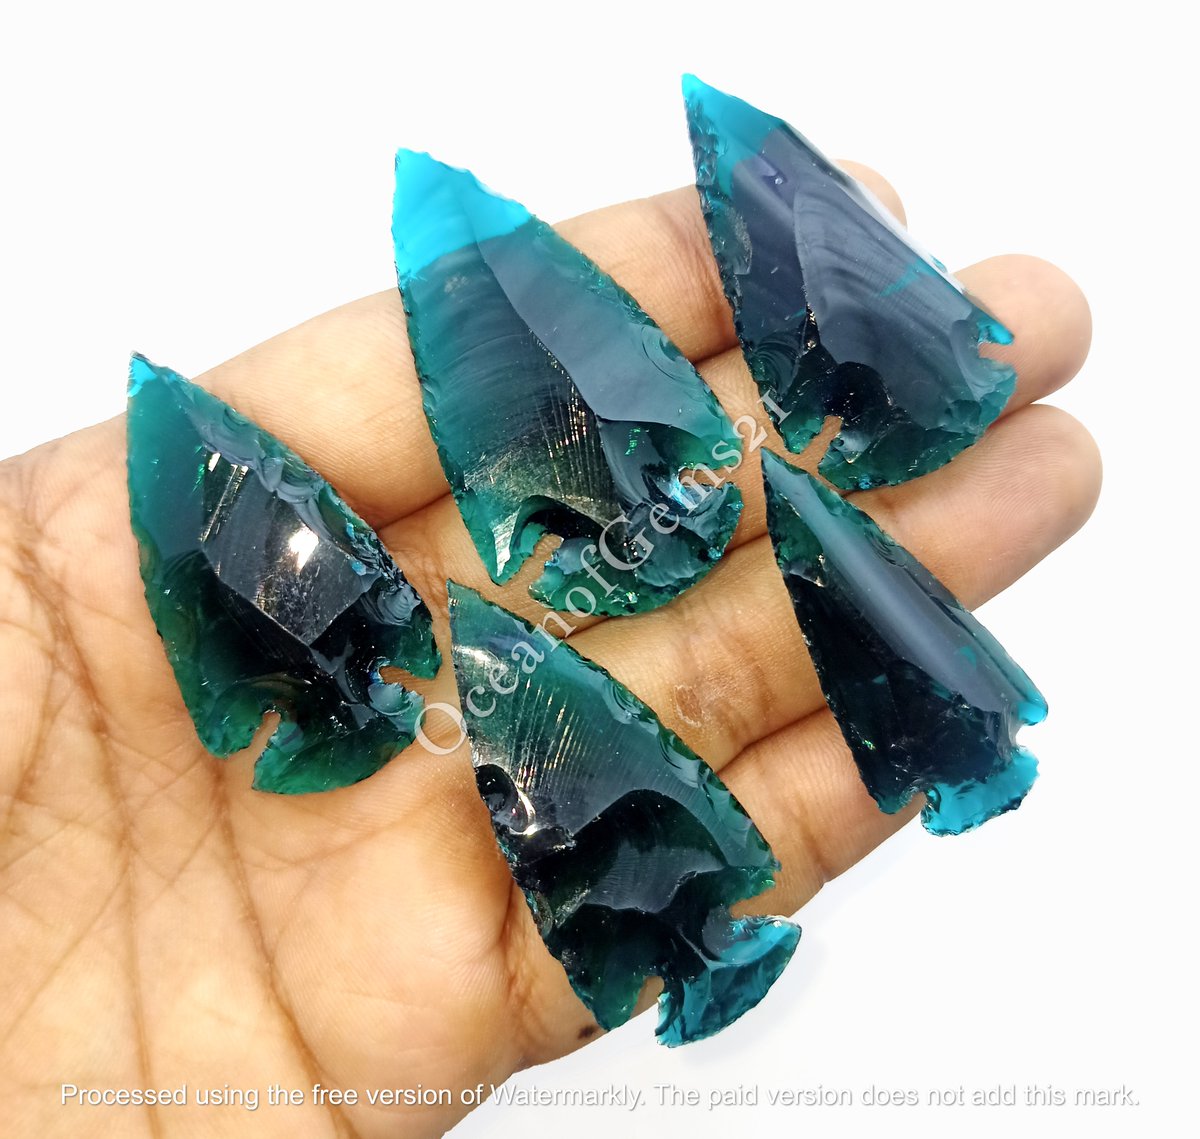 London Blue Topaz Arrowhead Cabochon Gemstone

$2.99 Per Piece
Size 25 to 35mm Approx
Free Drilling Service
Worldwide Shipping$6
Combined Shipping Available

#londonbluetopaz #londonbluetopazring #londonbluetopazarrowhead #arrowheadgemstone #bluetopaz #bluetopazjewelry